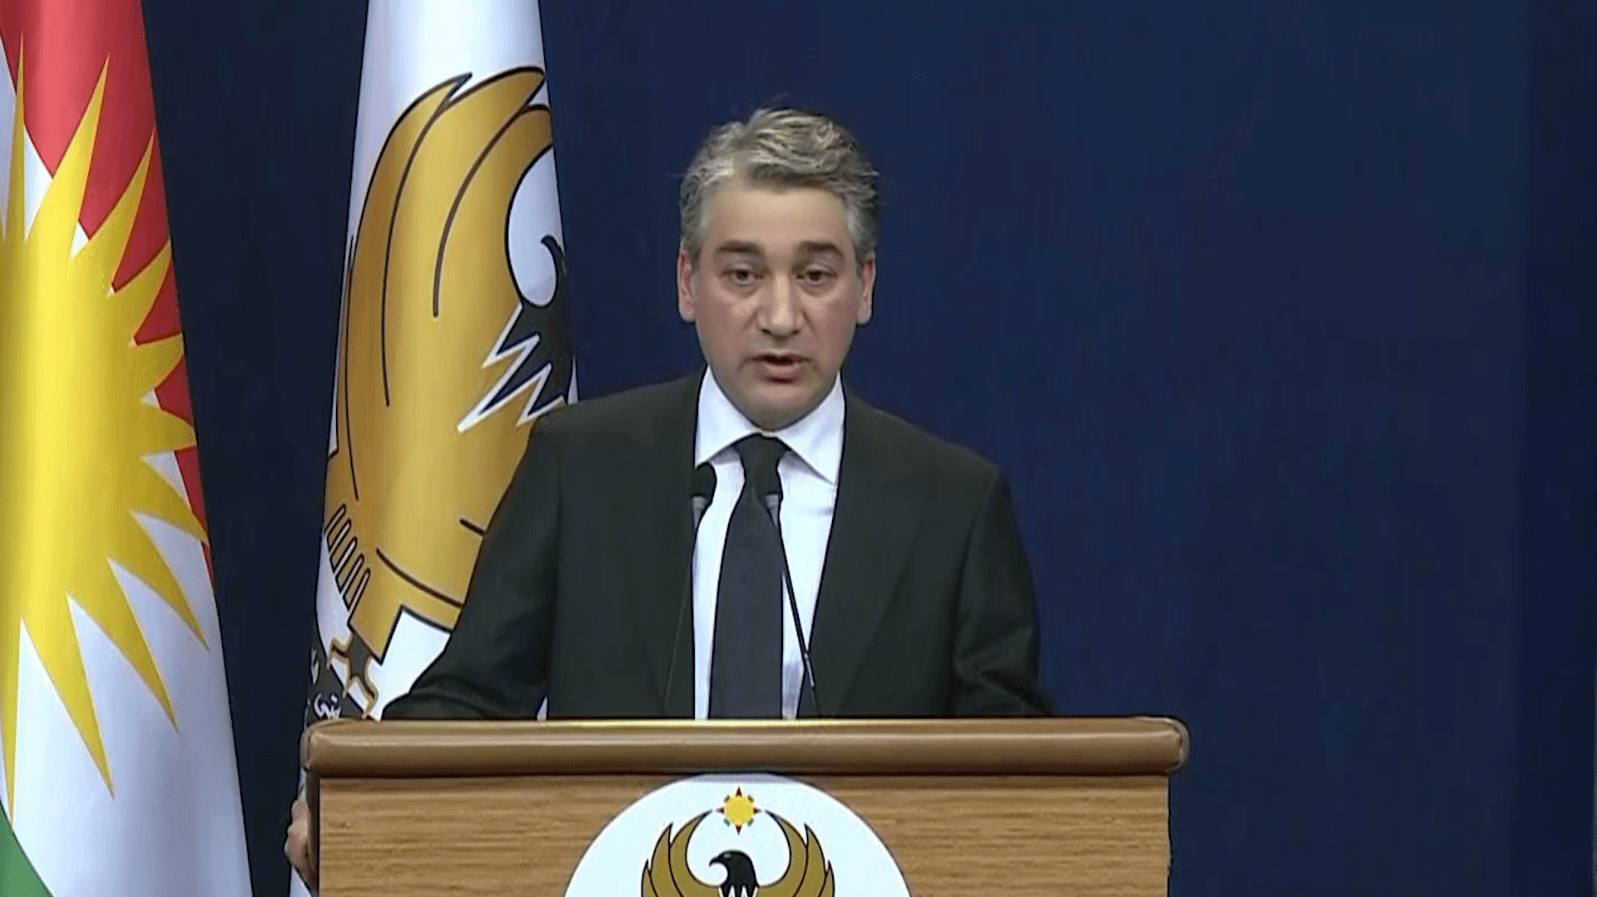 Baghdad and Erbil to discuss budget in a specialized committee: KRG spokesperson